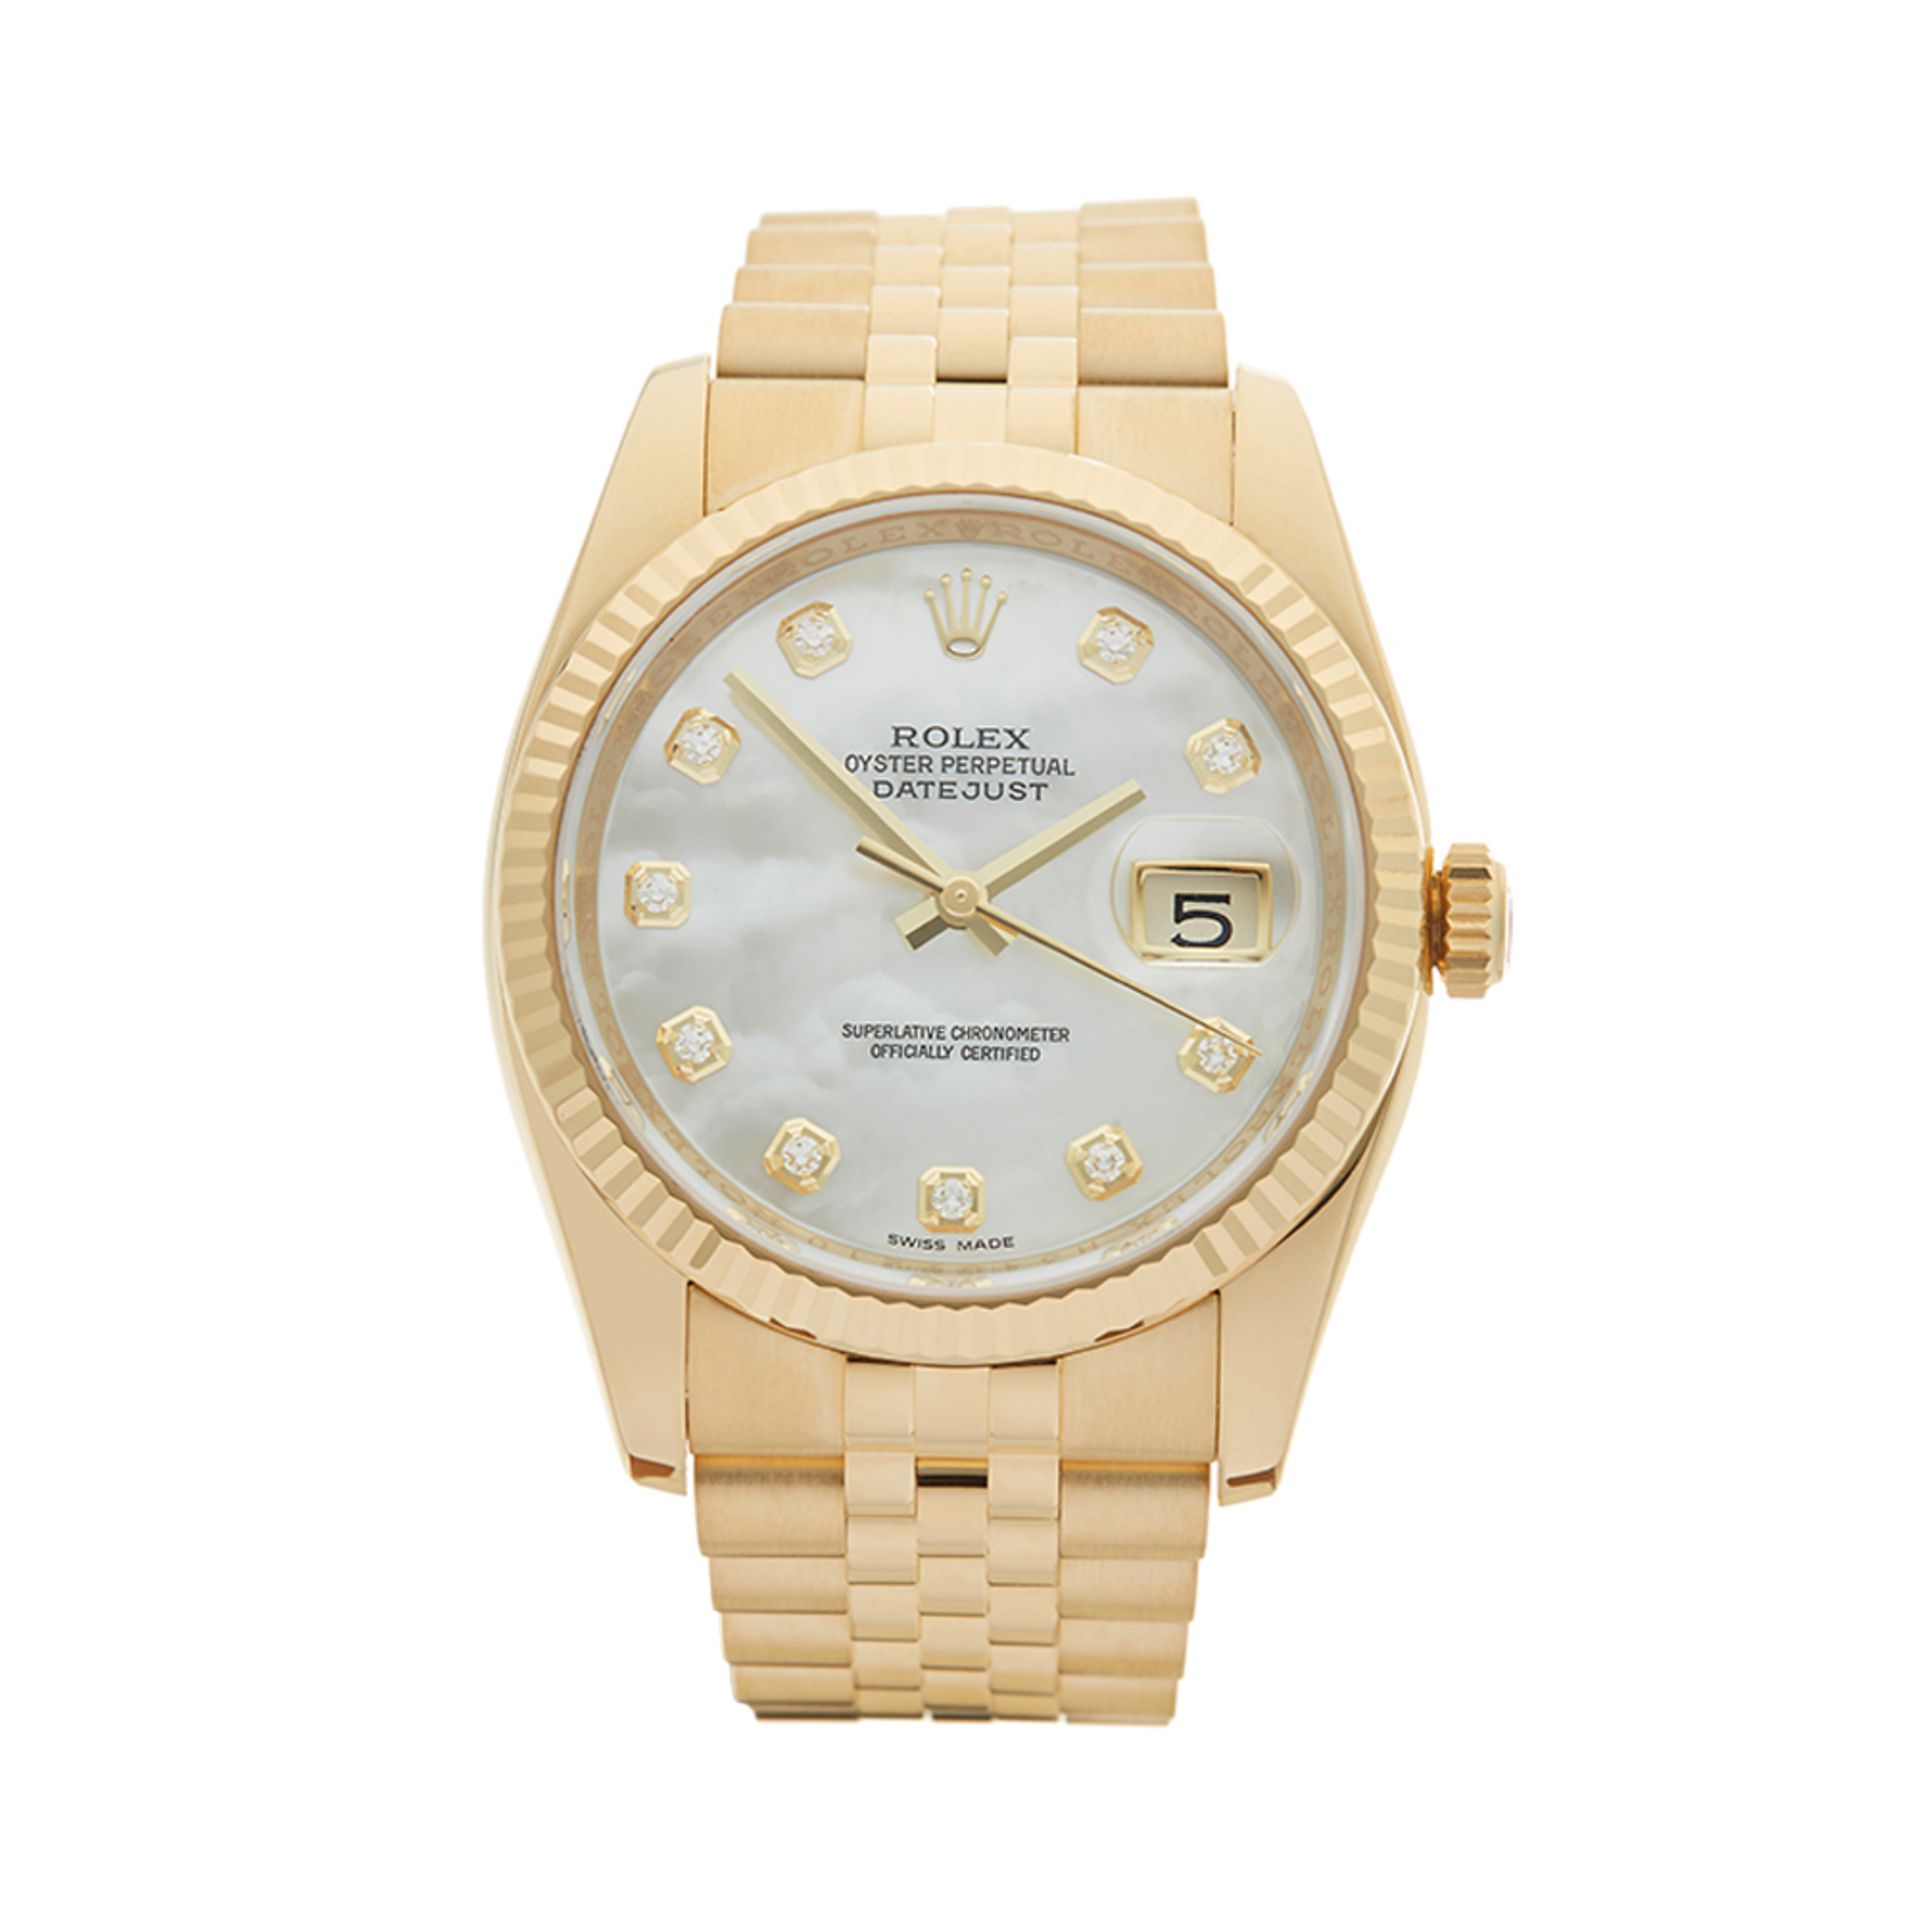 Datejust 36mm 18K Yellow Gold - 116238 - Image 2 of 8